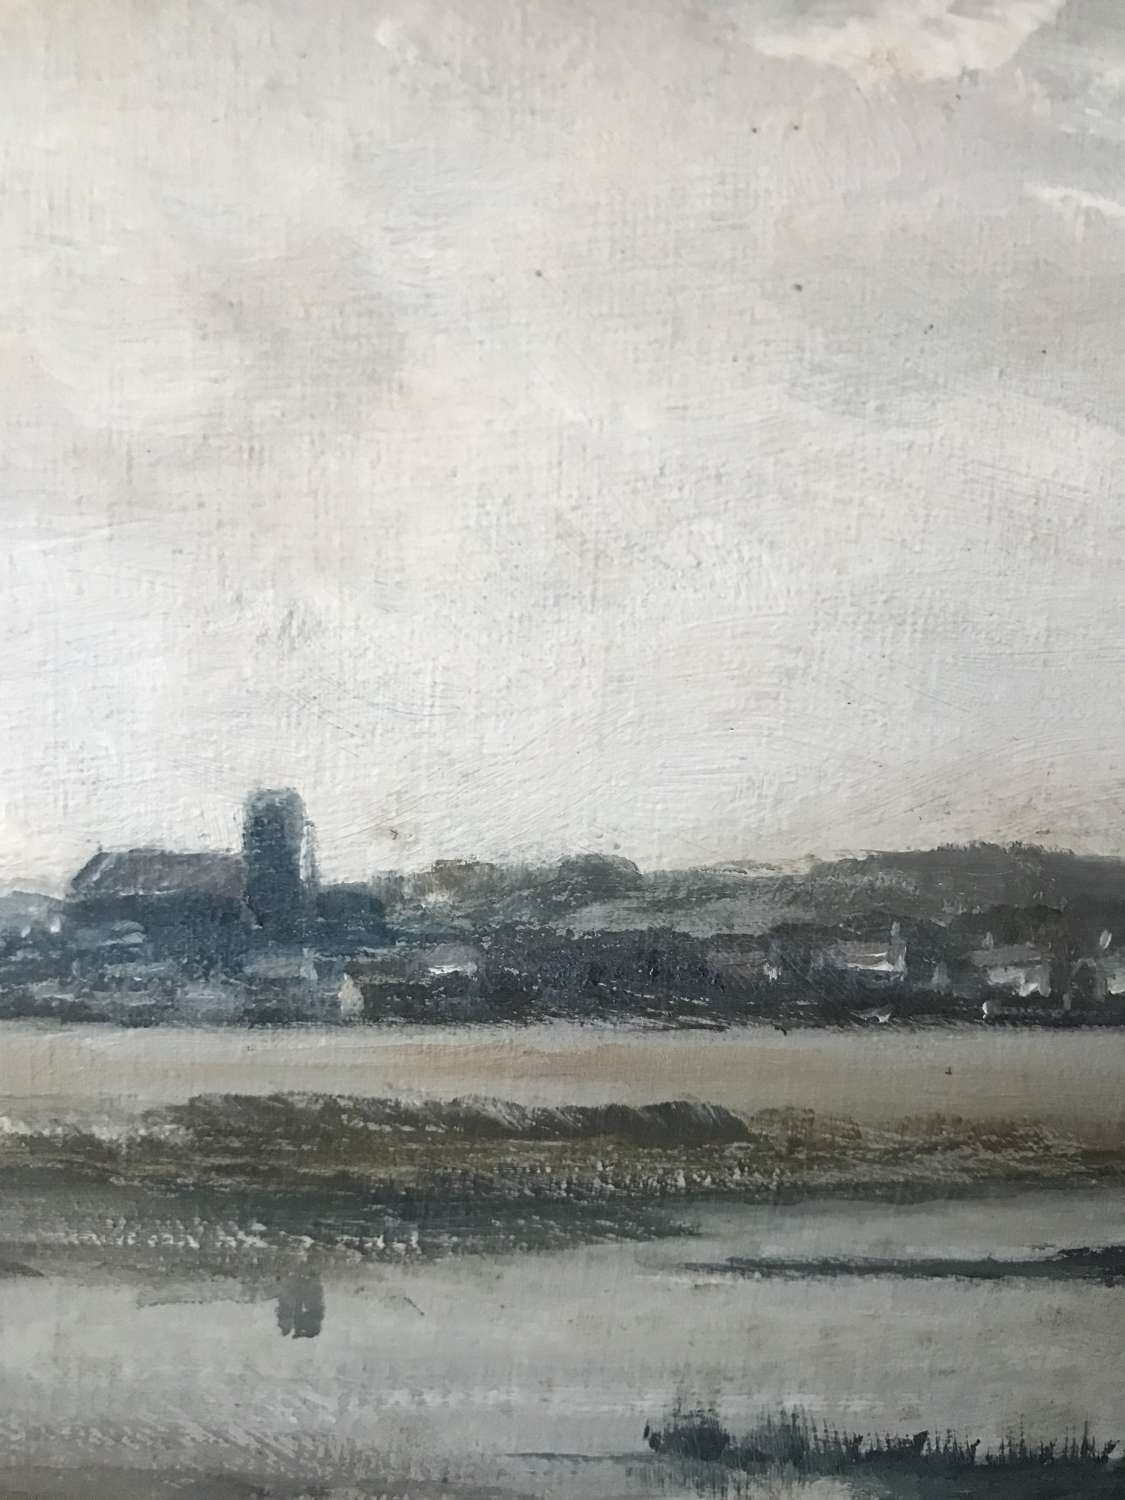 Oil painting of Salthouse, Norfolk by Arthur Pank